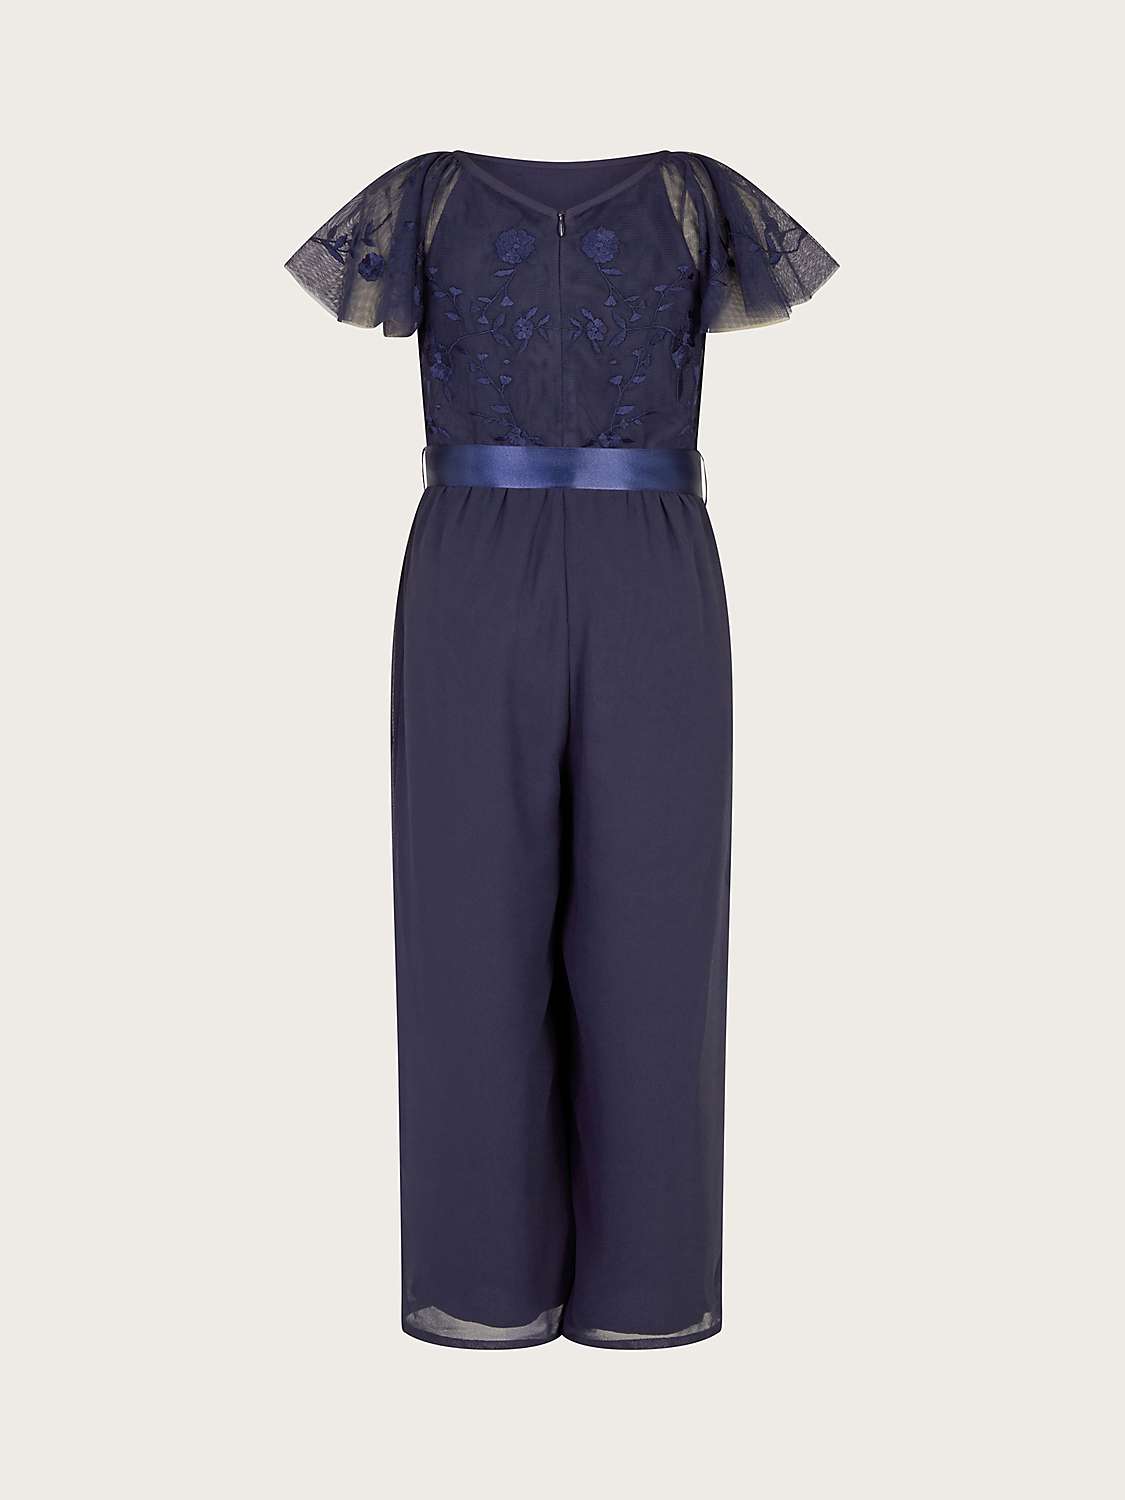 Buy Monsoon Kids' Amelia Embroidered Jumpsuit, Navy Online at johnlewis.com